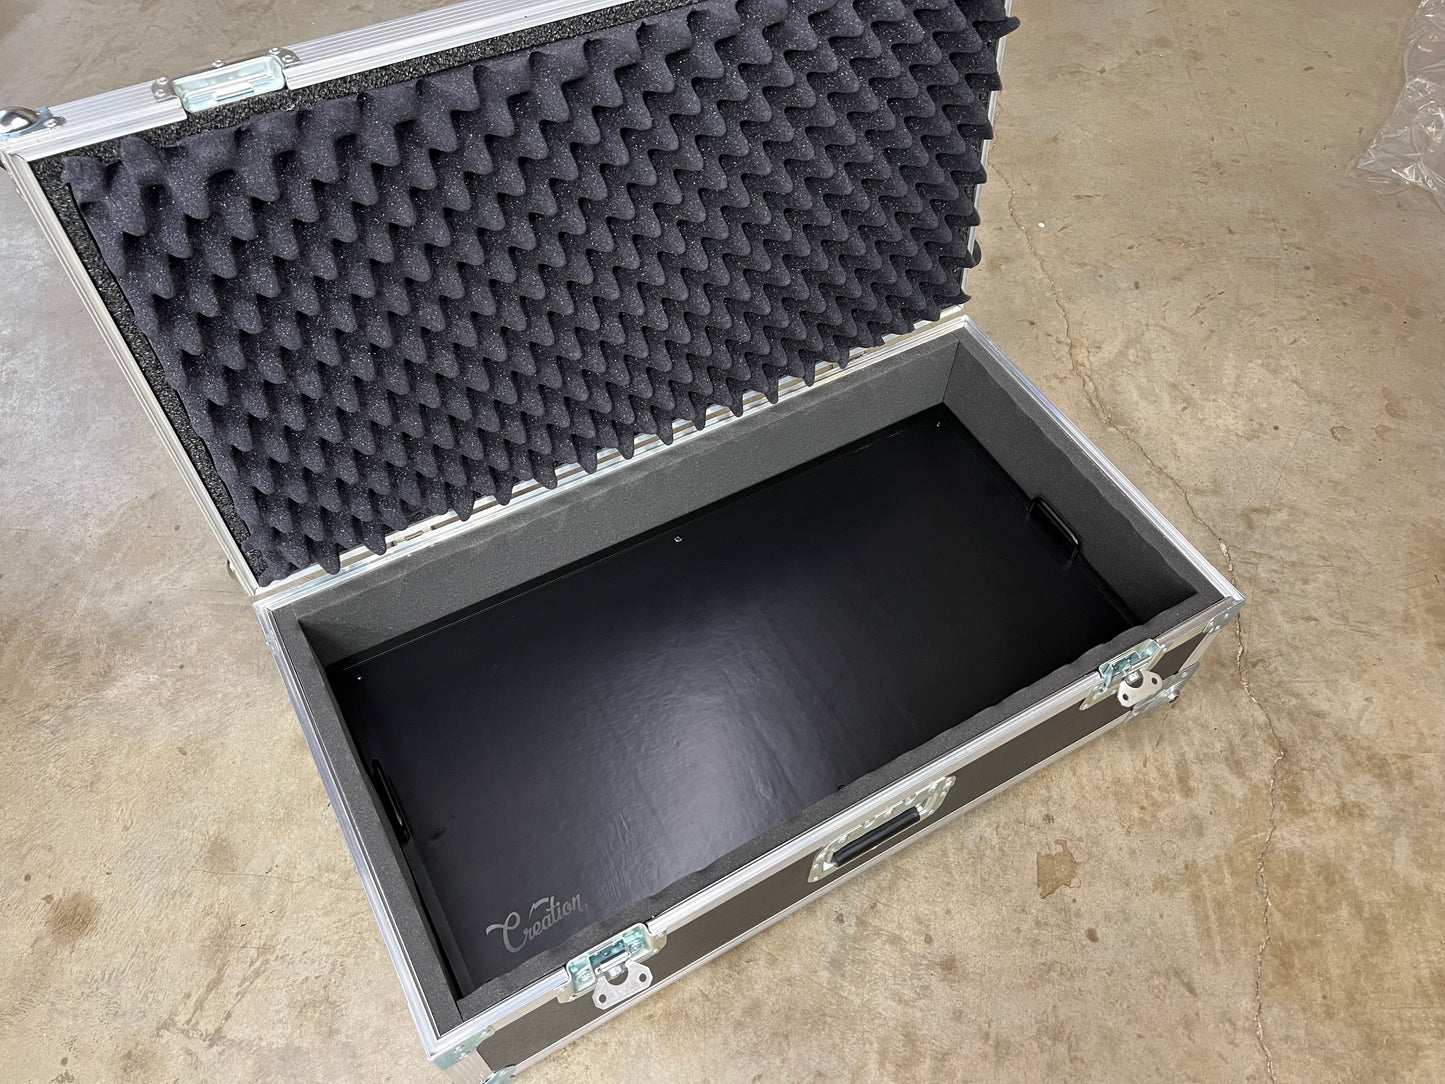 B-Stock 32x16 Drop-In Board and Case Bundle w/ Built In Casters